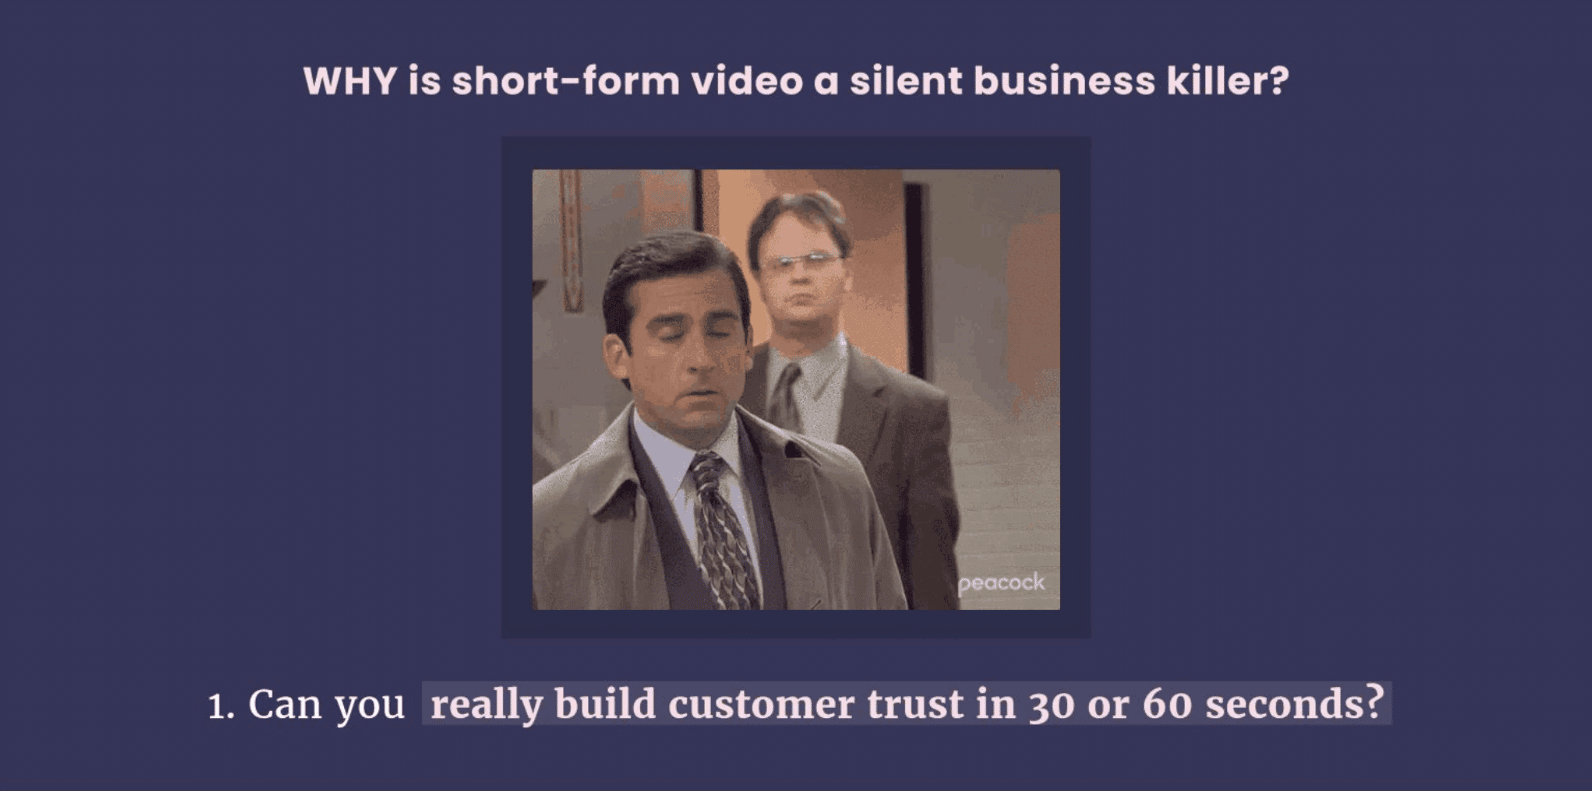 content study - can you build trust in 30-60sec